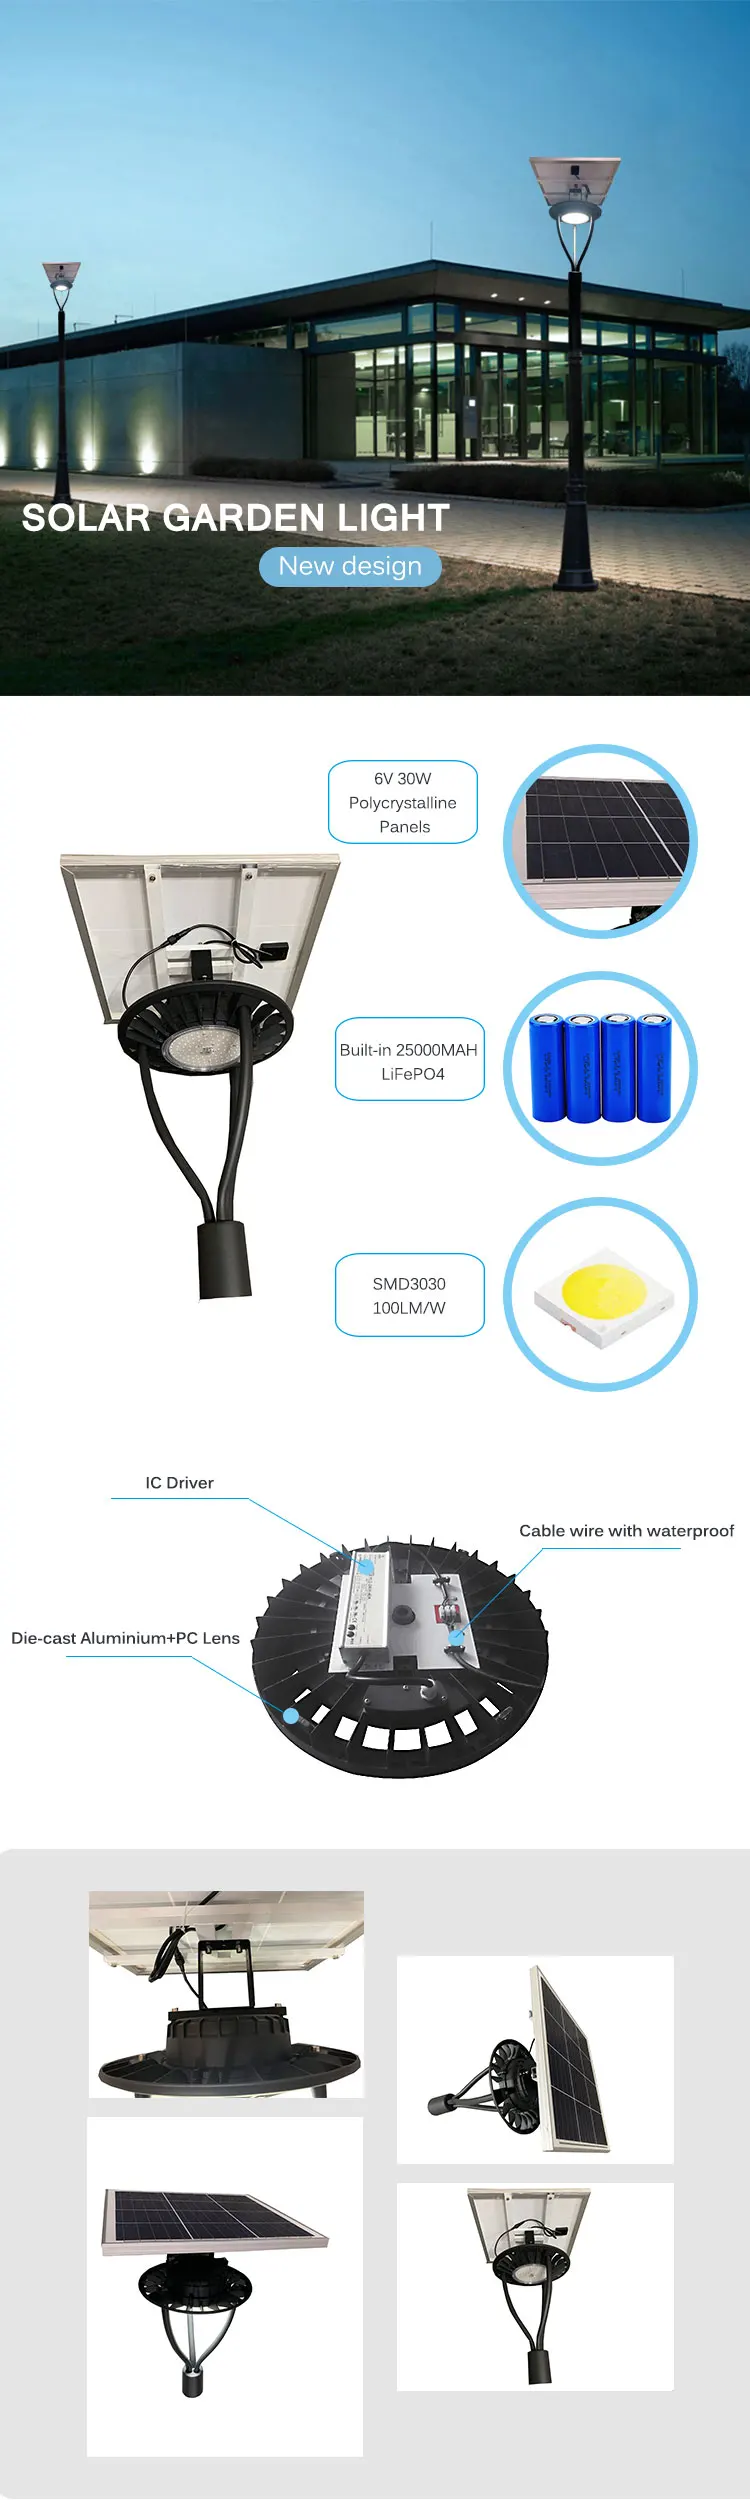 2020 New Style Lamp Pole Light Waterproof Outdoor LED Garden Light with Big Solar Panel